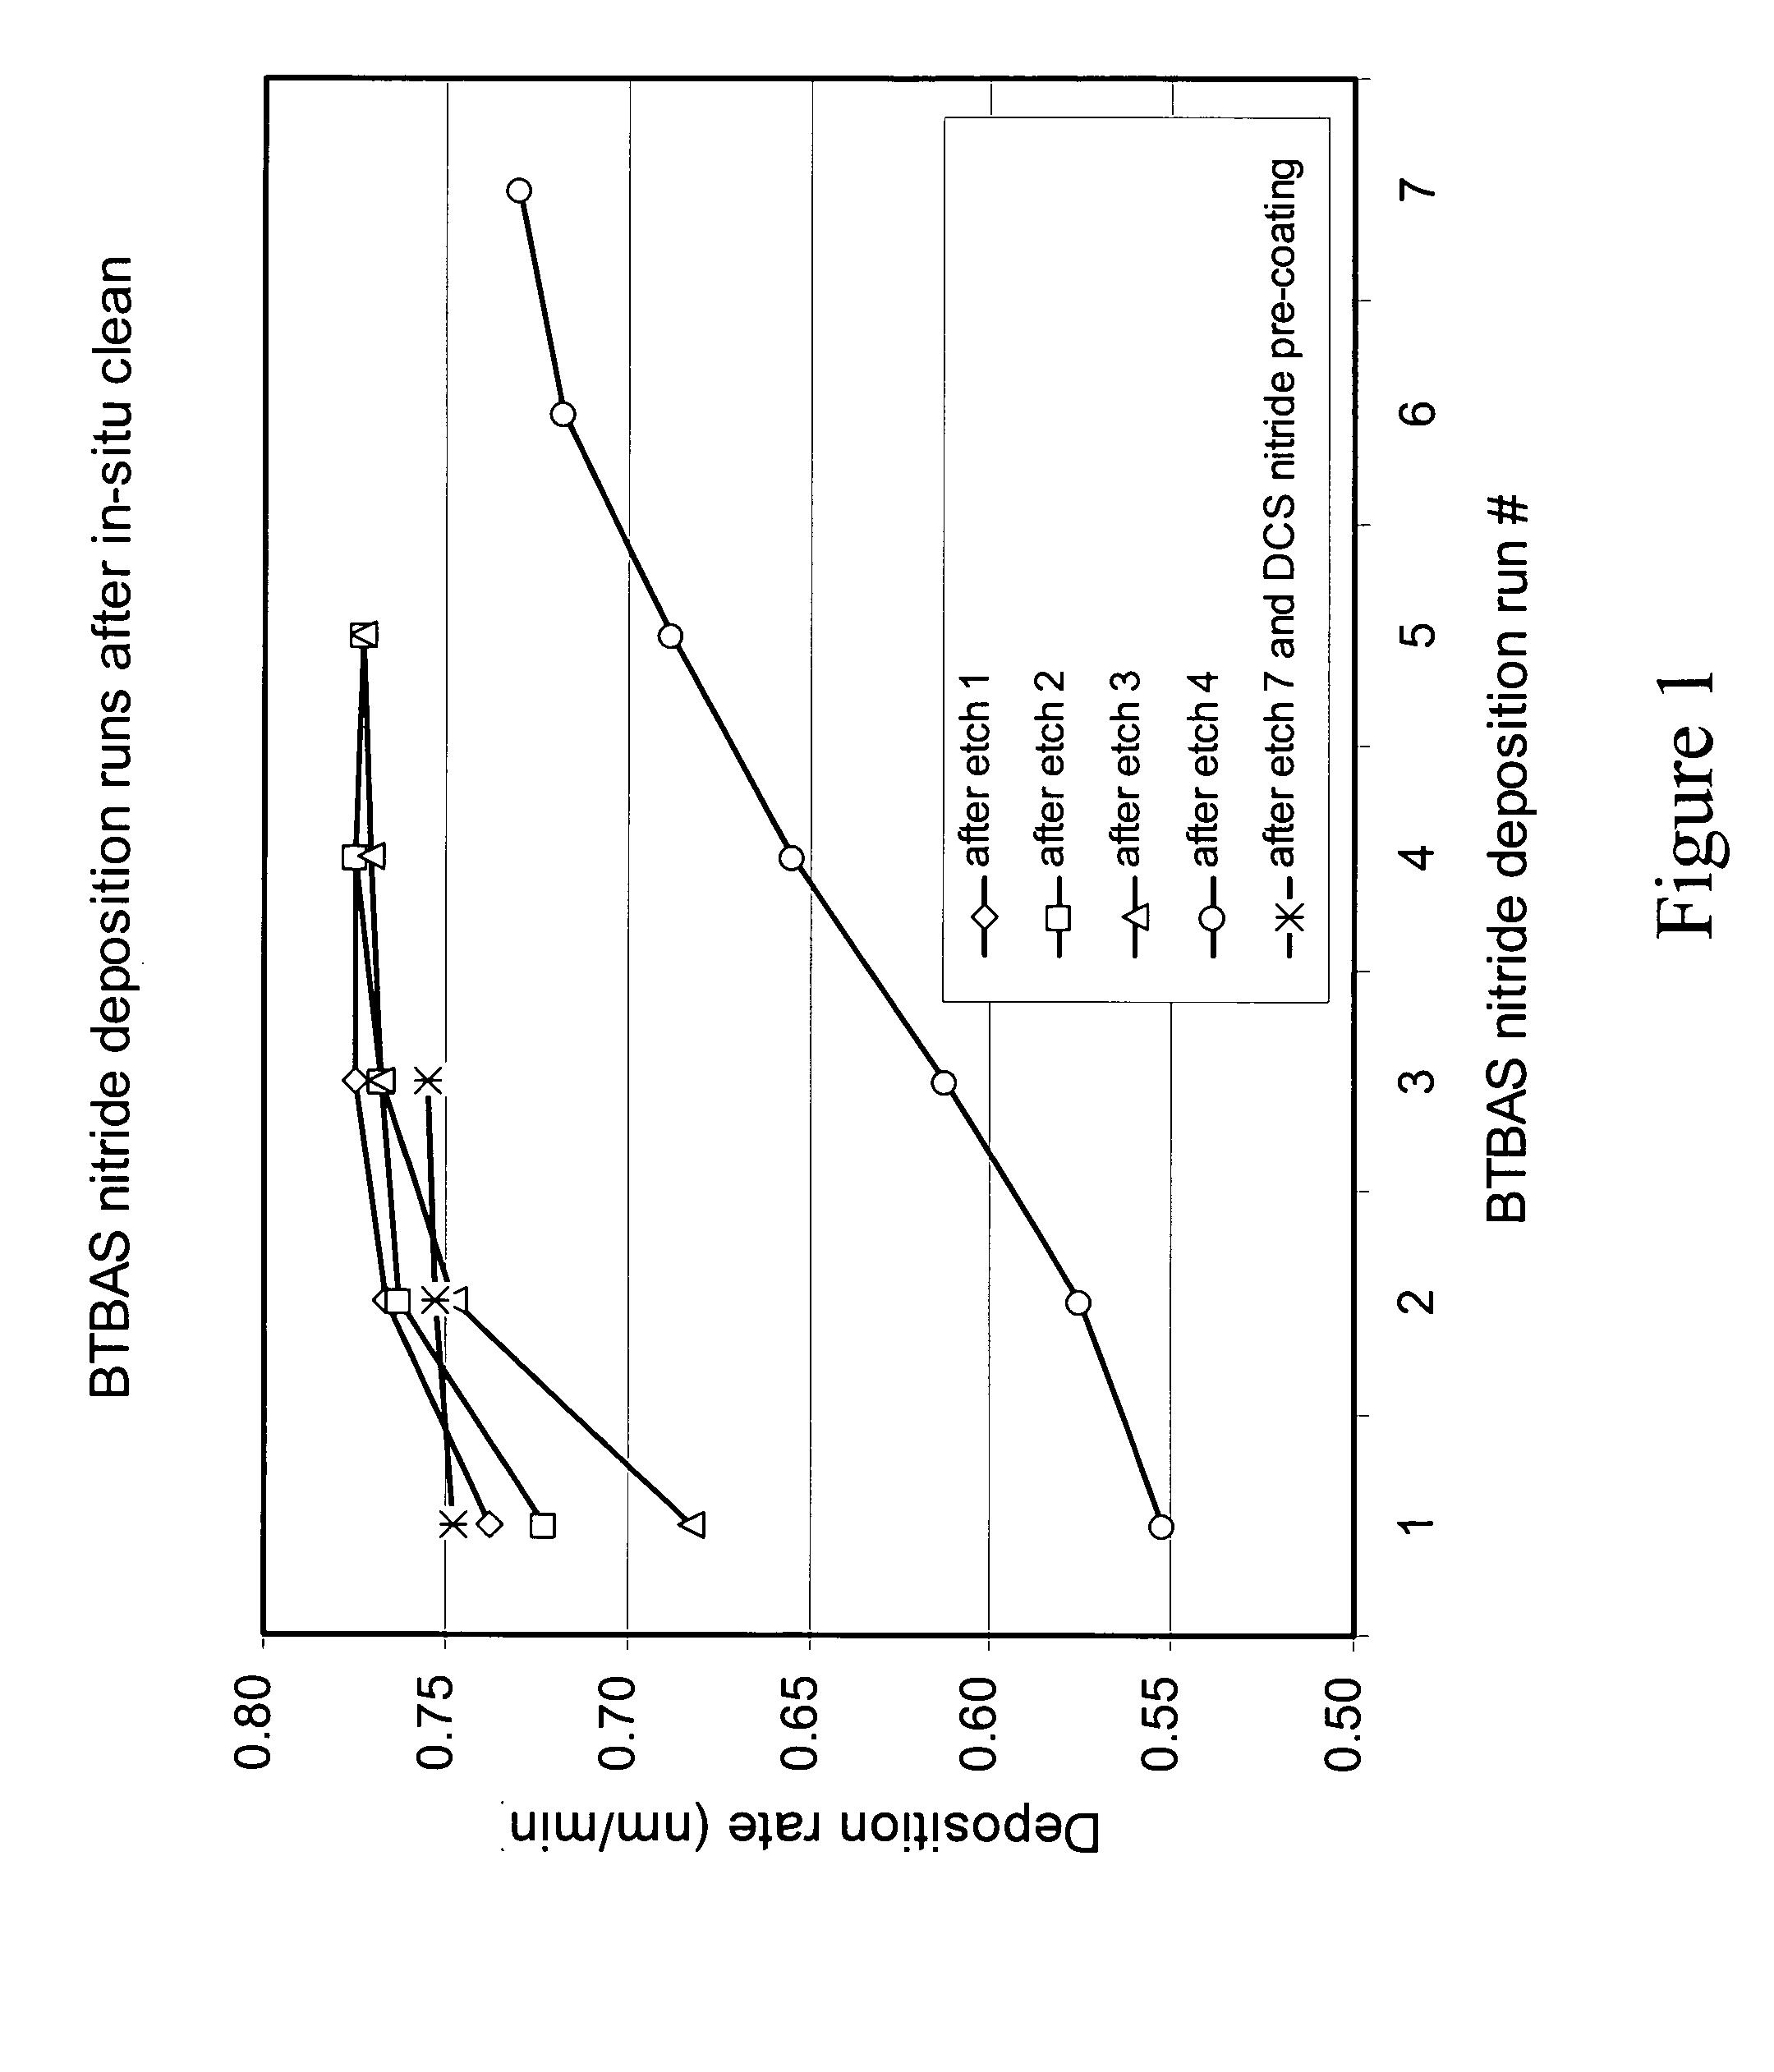 Method for the deposition of silicon nitride films